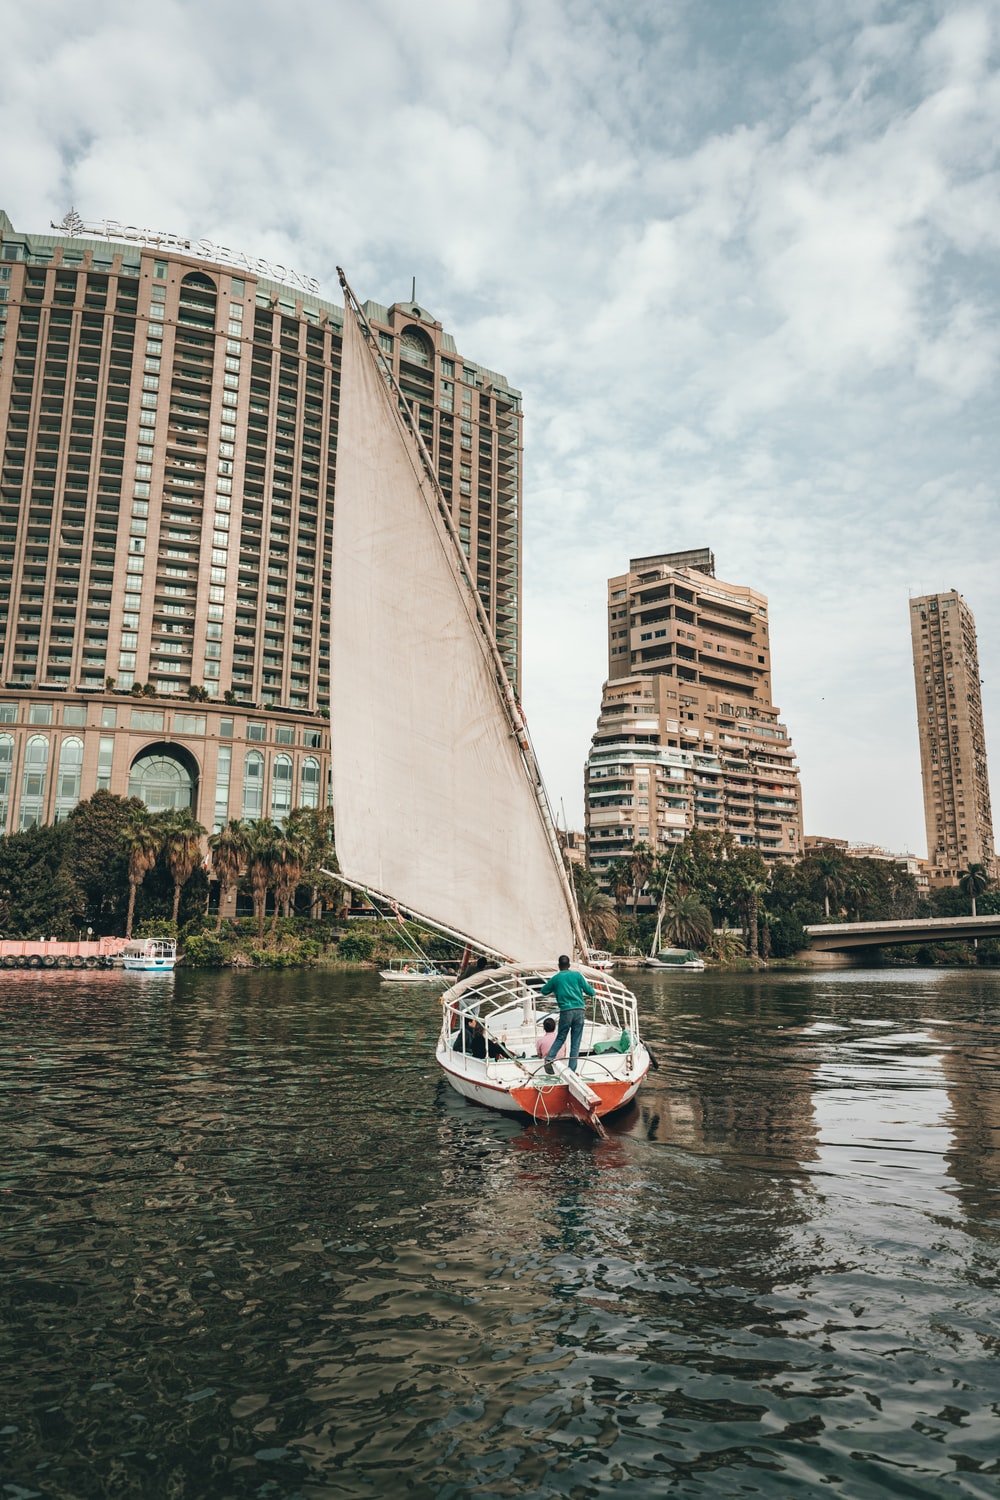 Nile River Picture. Download Free Image